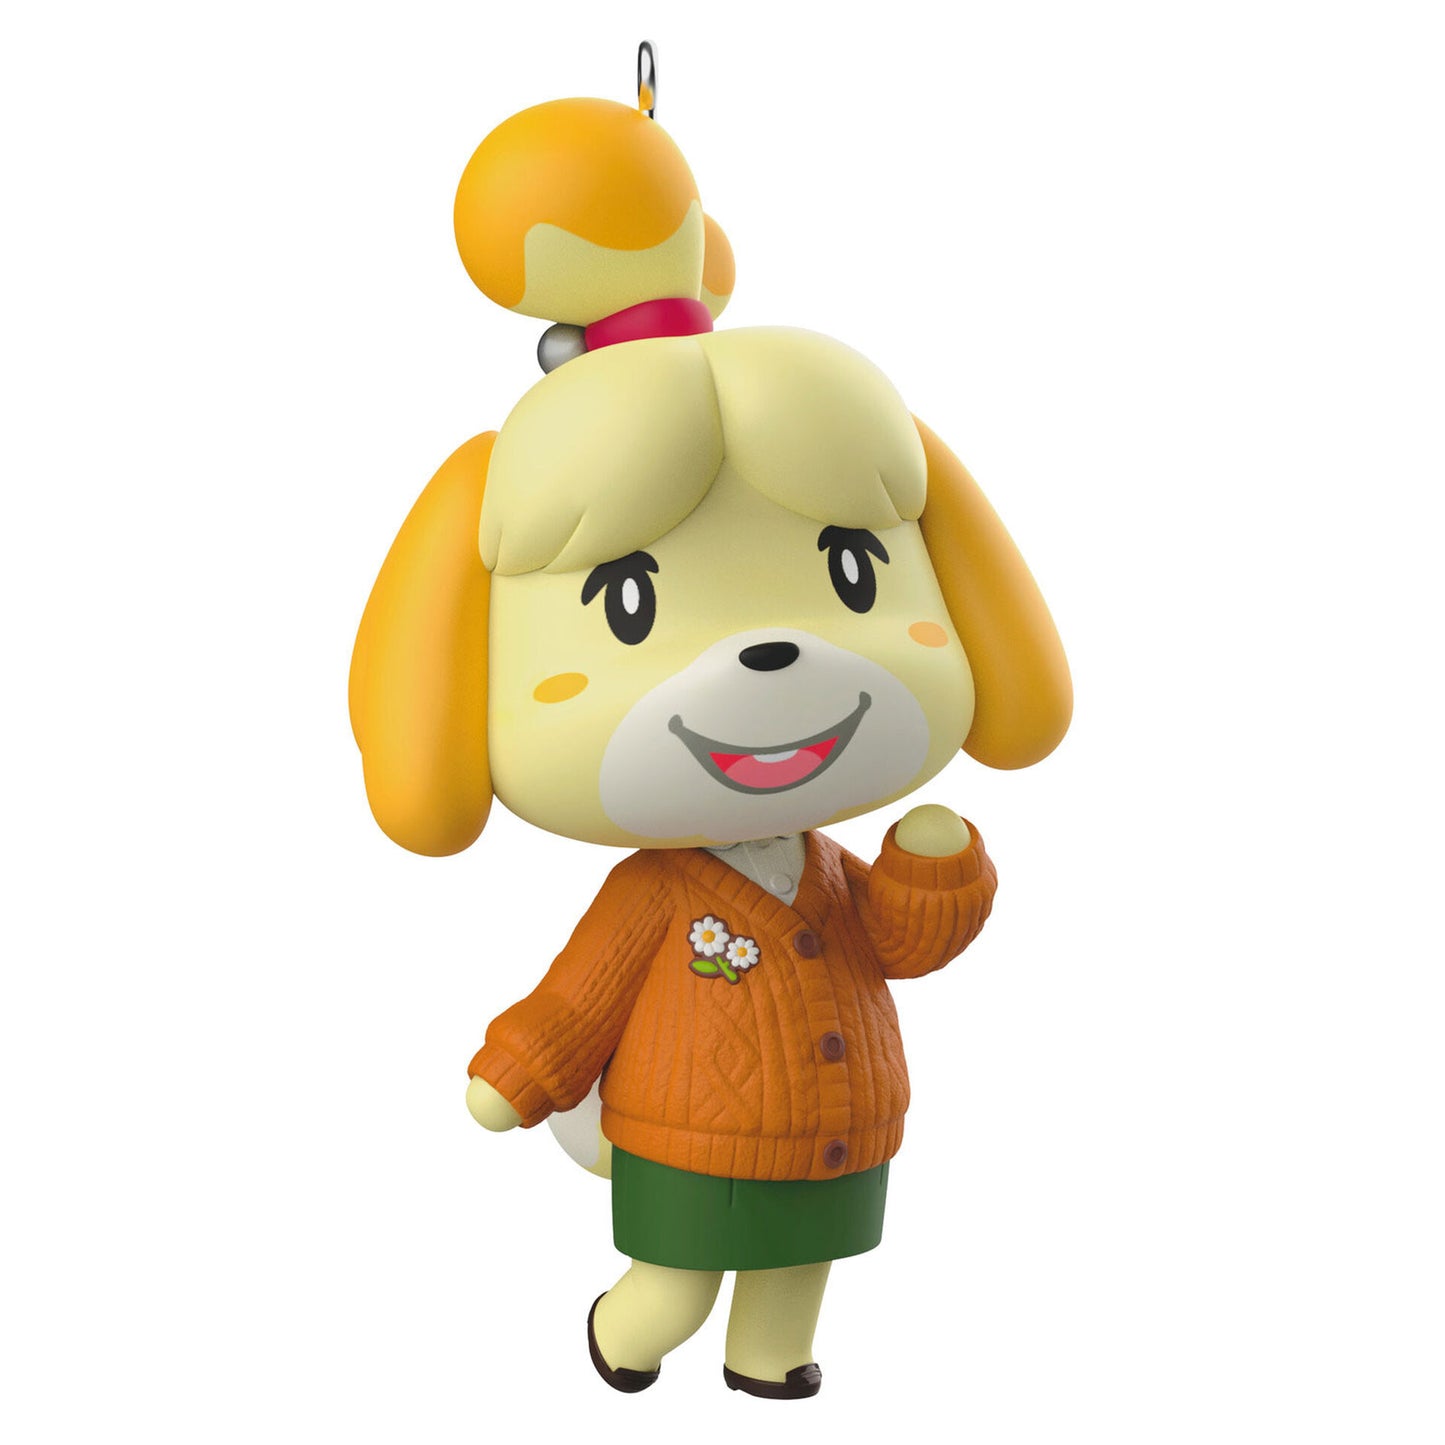 Christmas ornament depicting Animal Crossing character Isabelle the yellow dog wearing her fall outfit.